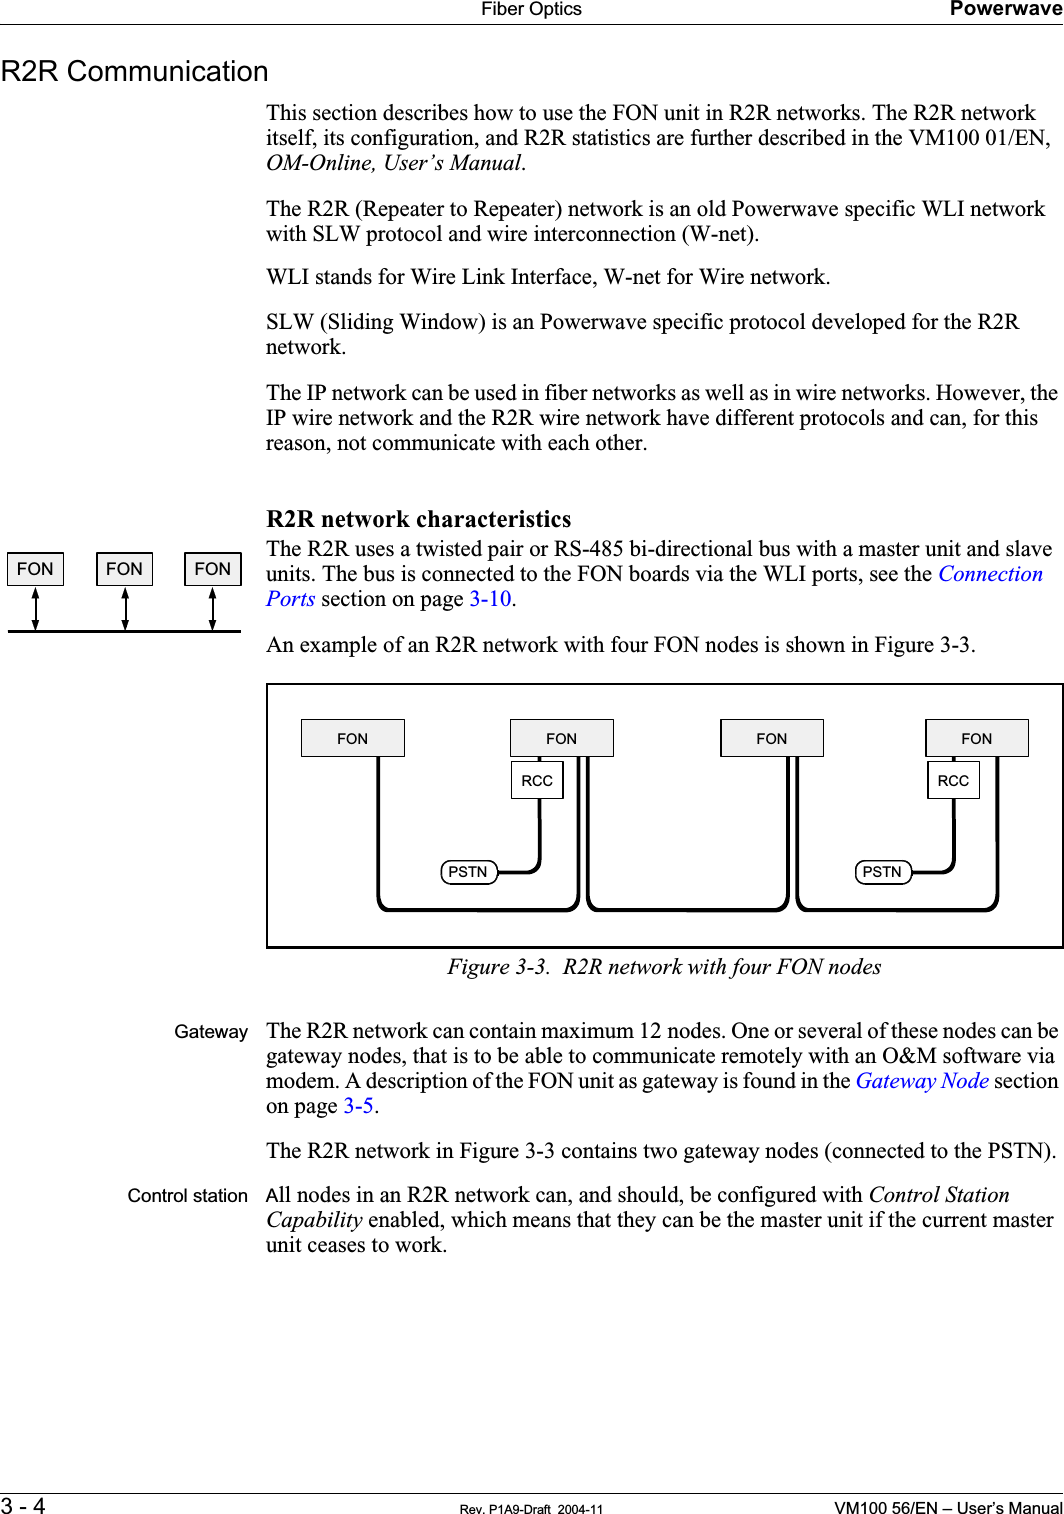 Fiber Optics Powerwave3 - 4 Rev. P1A9-Draft  2004-11 VM100 56/EN – User’s ManualR2R CommunicationThis section describes how to use the FON unit in R2R networks. The R2R network itself, its configuration, and R2R statistics are further described in the VM100 01/EN, OM-Online, User’s Manual.The R2R (Repeater to Repeater) network is an old Powerwave specific WLI network with SLW protocol and wire interconnection (W-net).      WLI stands for Wire Link Interface, W-net for Wire network.SLW (Sliding Window) is an Powerwave specific protocol developed for the R2R network.The IP network can be used in fiber networks as well as in wire networks. However, the IP wire network and the R2R wire network have different protocols and can, for this reason, not communicate with each other.R2R network characteristicsThe R2R uses a twisted pair or RS-485 bi-directional bus with a master unit and slave units. The bus is connected to the FON boards via the WLI ports, see the Connection Ports section on page 3-10.An example of an R2R network with four FON nodes is shown in Figure 3-3.Figure 3-3.  R2R network with four FON nodesGateway The R2R network can contain maximum 12 nodes. One or several of these nodes can be gateway nodes, that is to be able to communicate remotely with an O&amp;M software via modem. A description of the FON unit as gateway is found in the Gateway Node section on page 3-5.The R2R network in Figure 3-3 contains two gateway nodes (connected to the PSTN).Control station All nodes in an R2R network can, and should, be configured with Control Station Capability enabled, which means that they can be the master unit if the current master unit ceases to work.FON FON FONPSTNPSTNFON FON FON FONRCC RCC